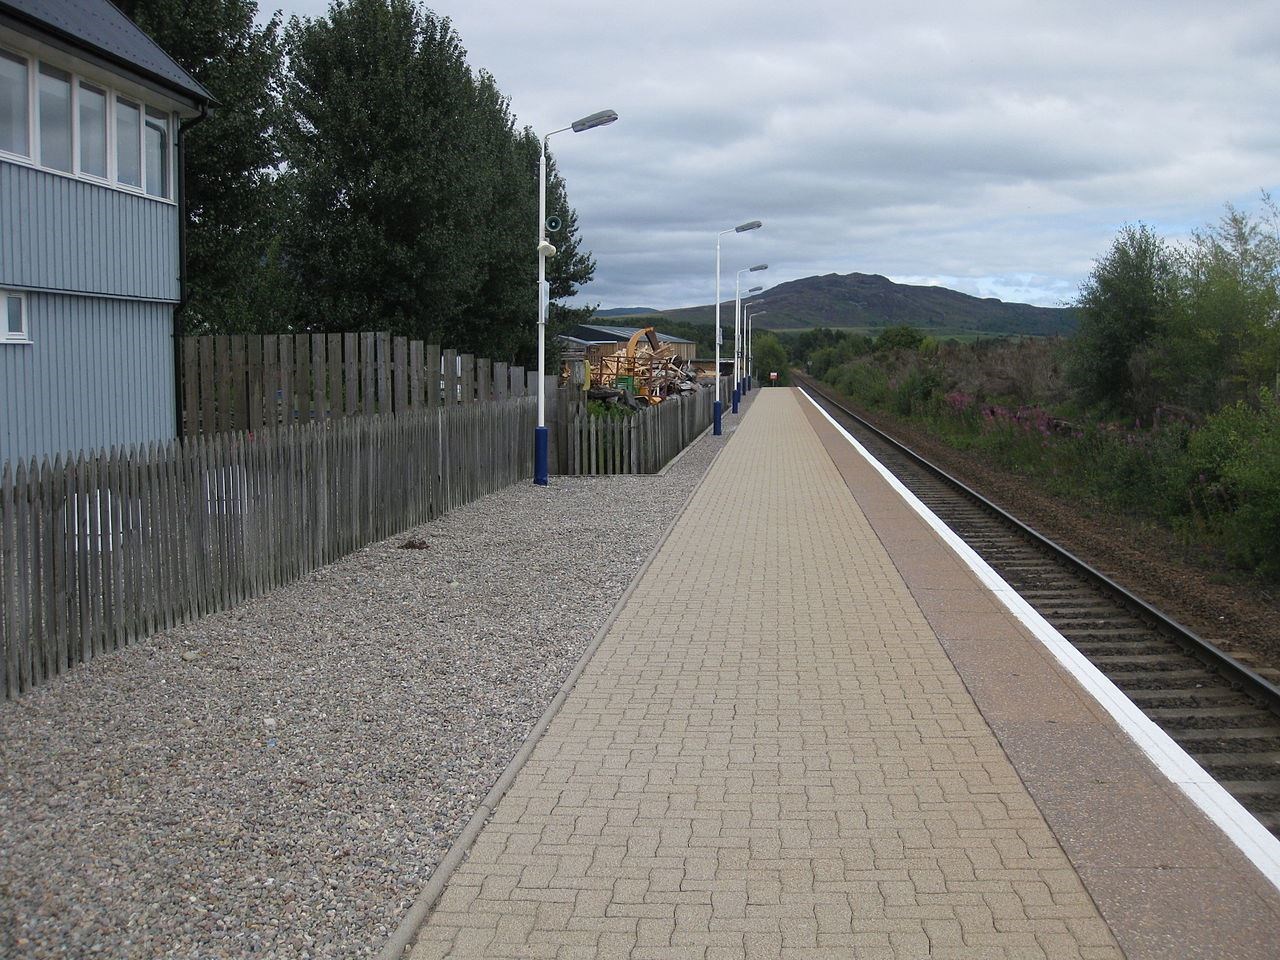 The platform at Newtonmore (library)